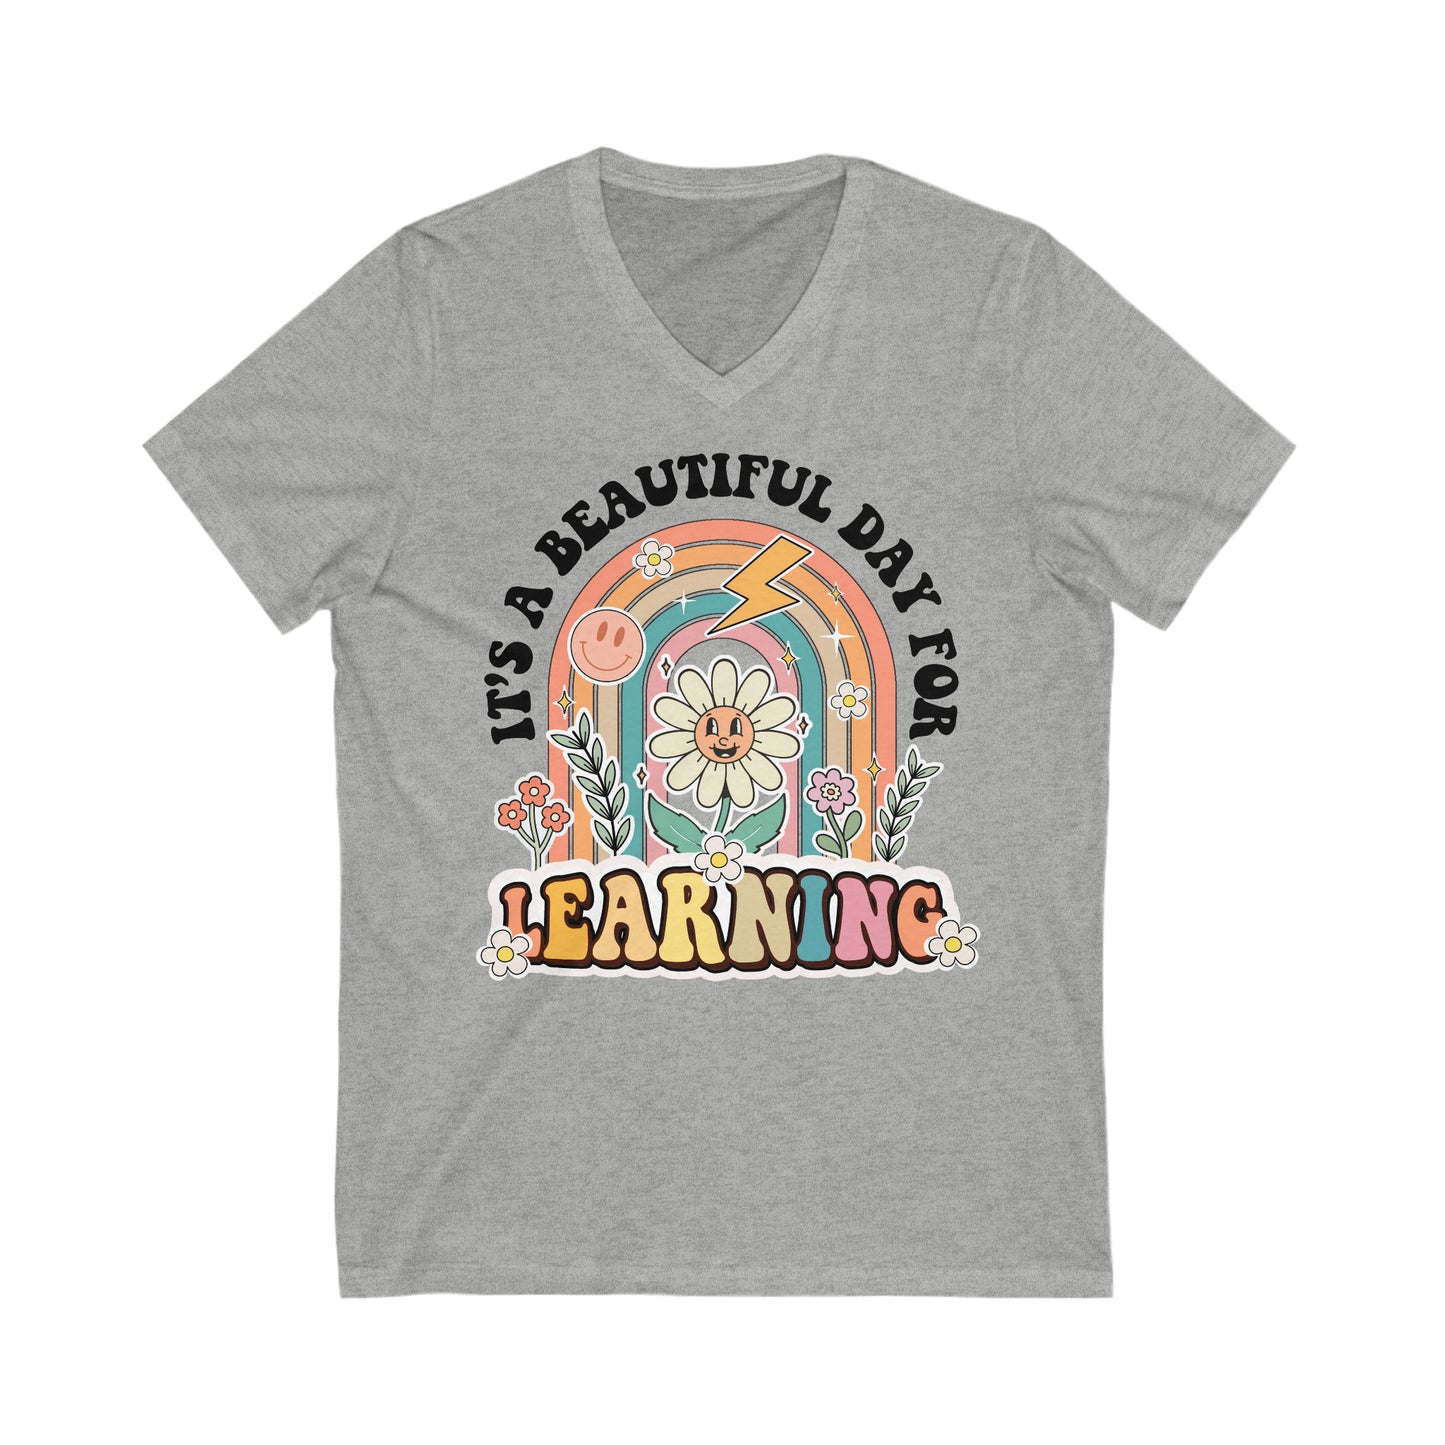 It’s a Beautiful Day for Learning - Unisex Jersey Short Sleeve V-Neck Tee